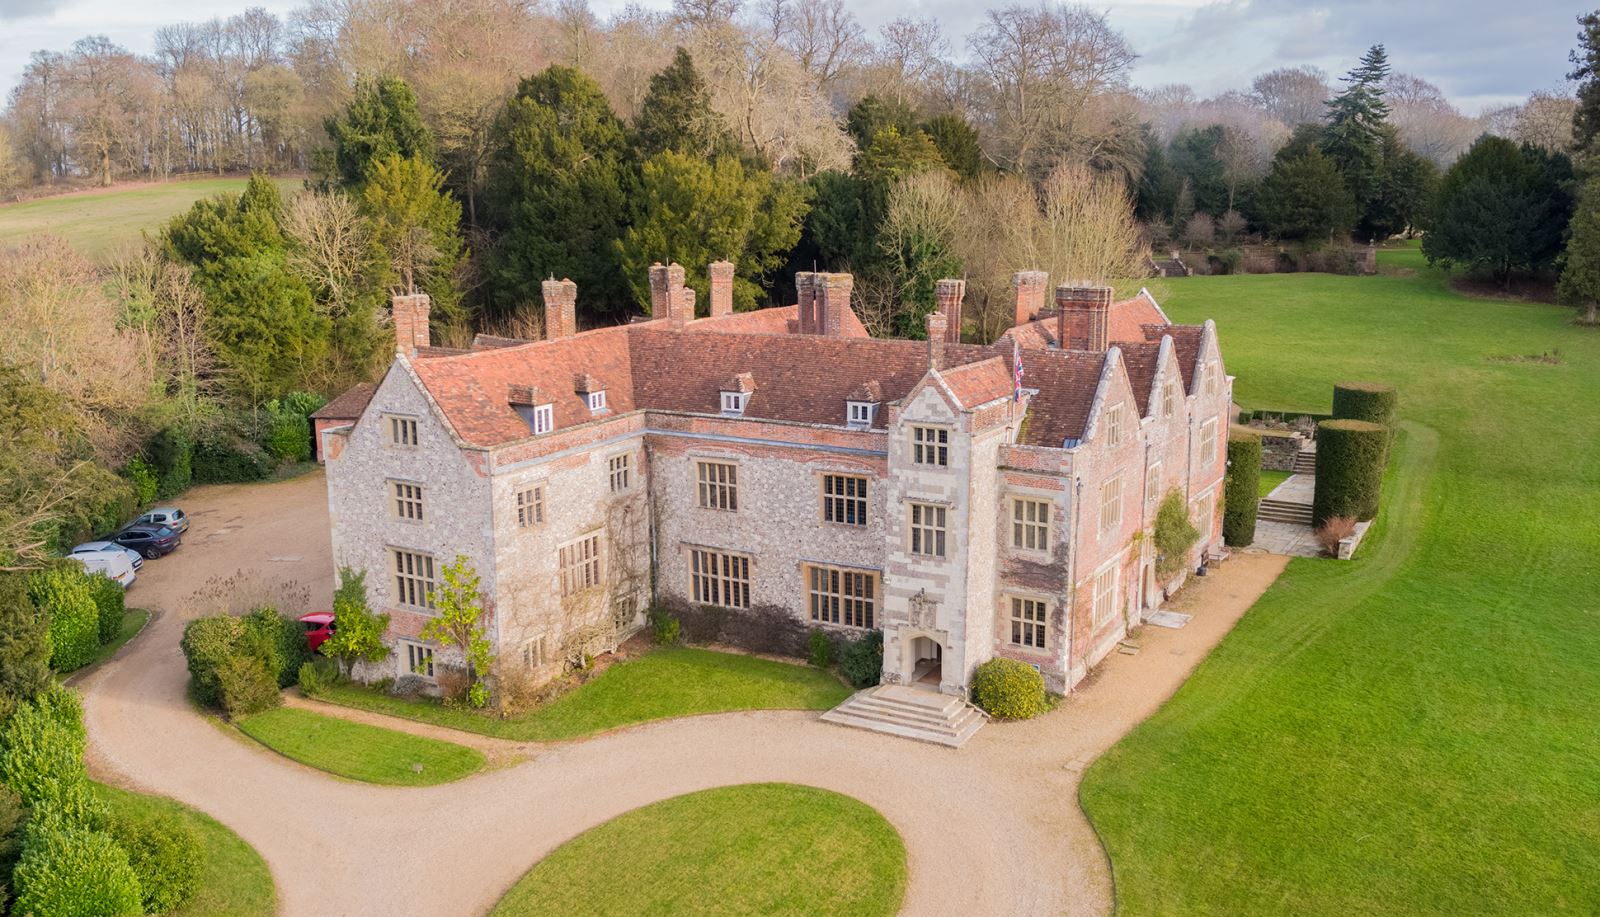 Chawton House in the Village of Chawton, Hampshire